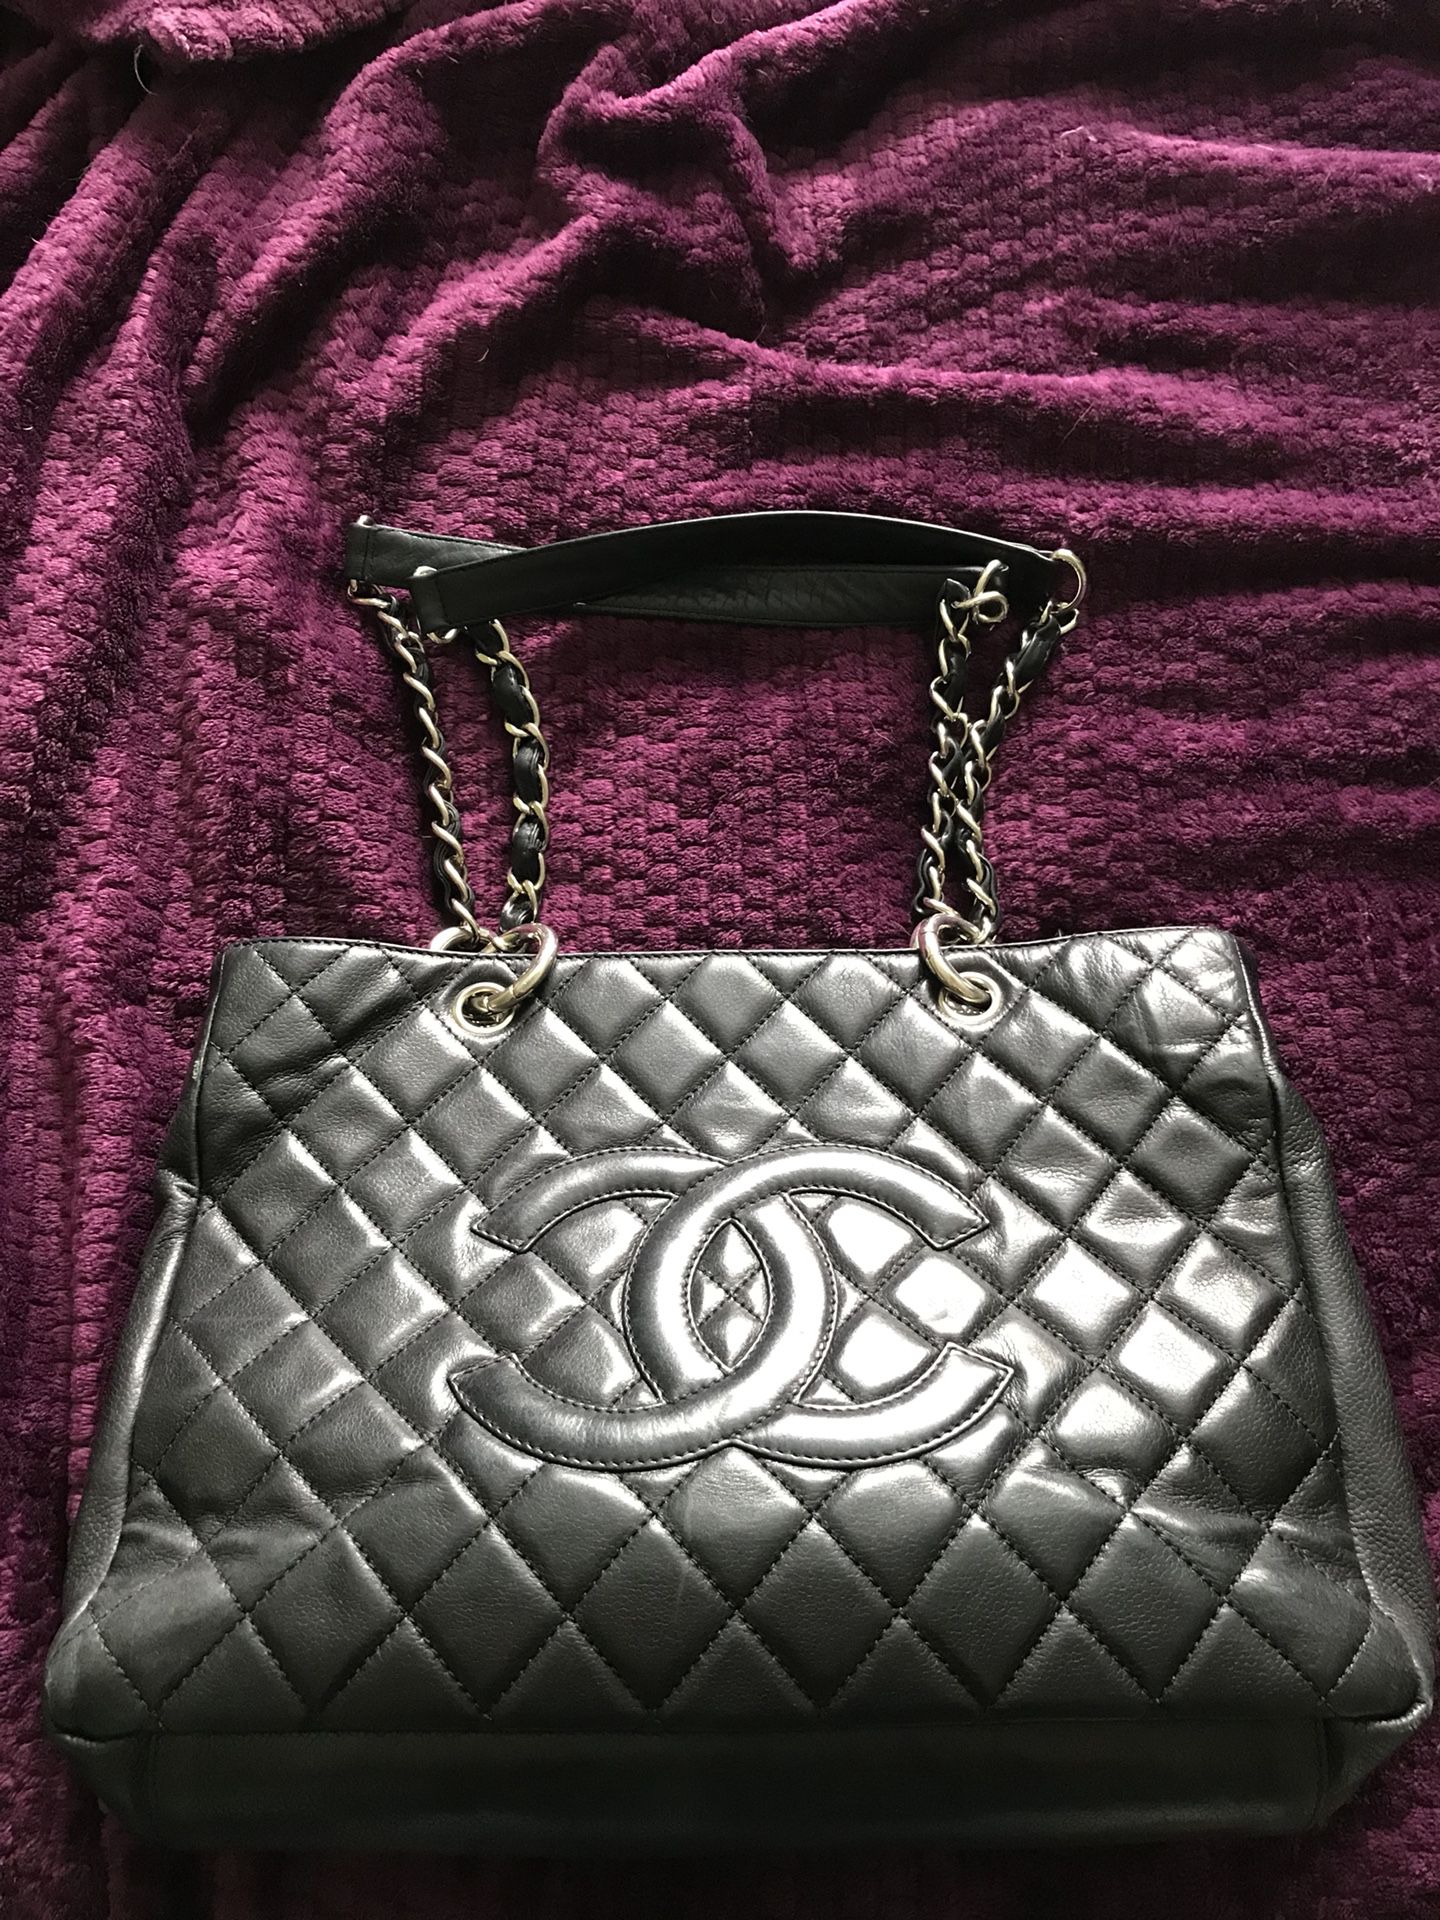 Chanel Grand Shopping Tote for Sale in Hoffman Estates, IL - OfferUp